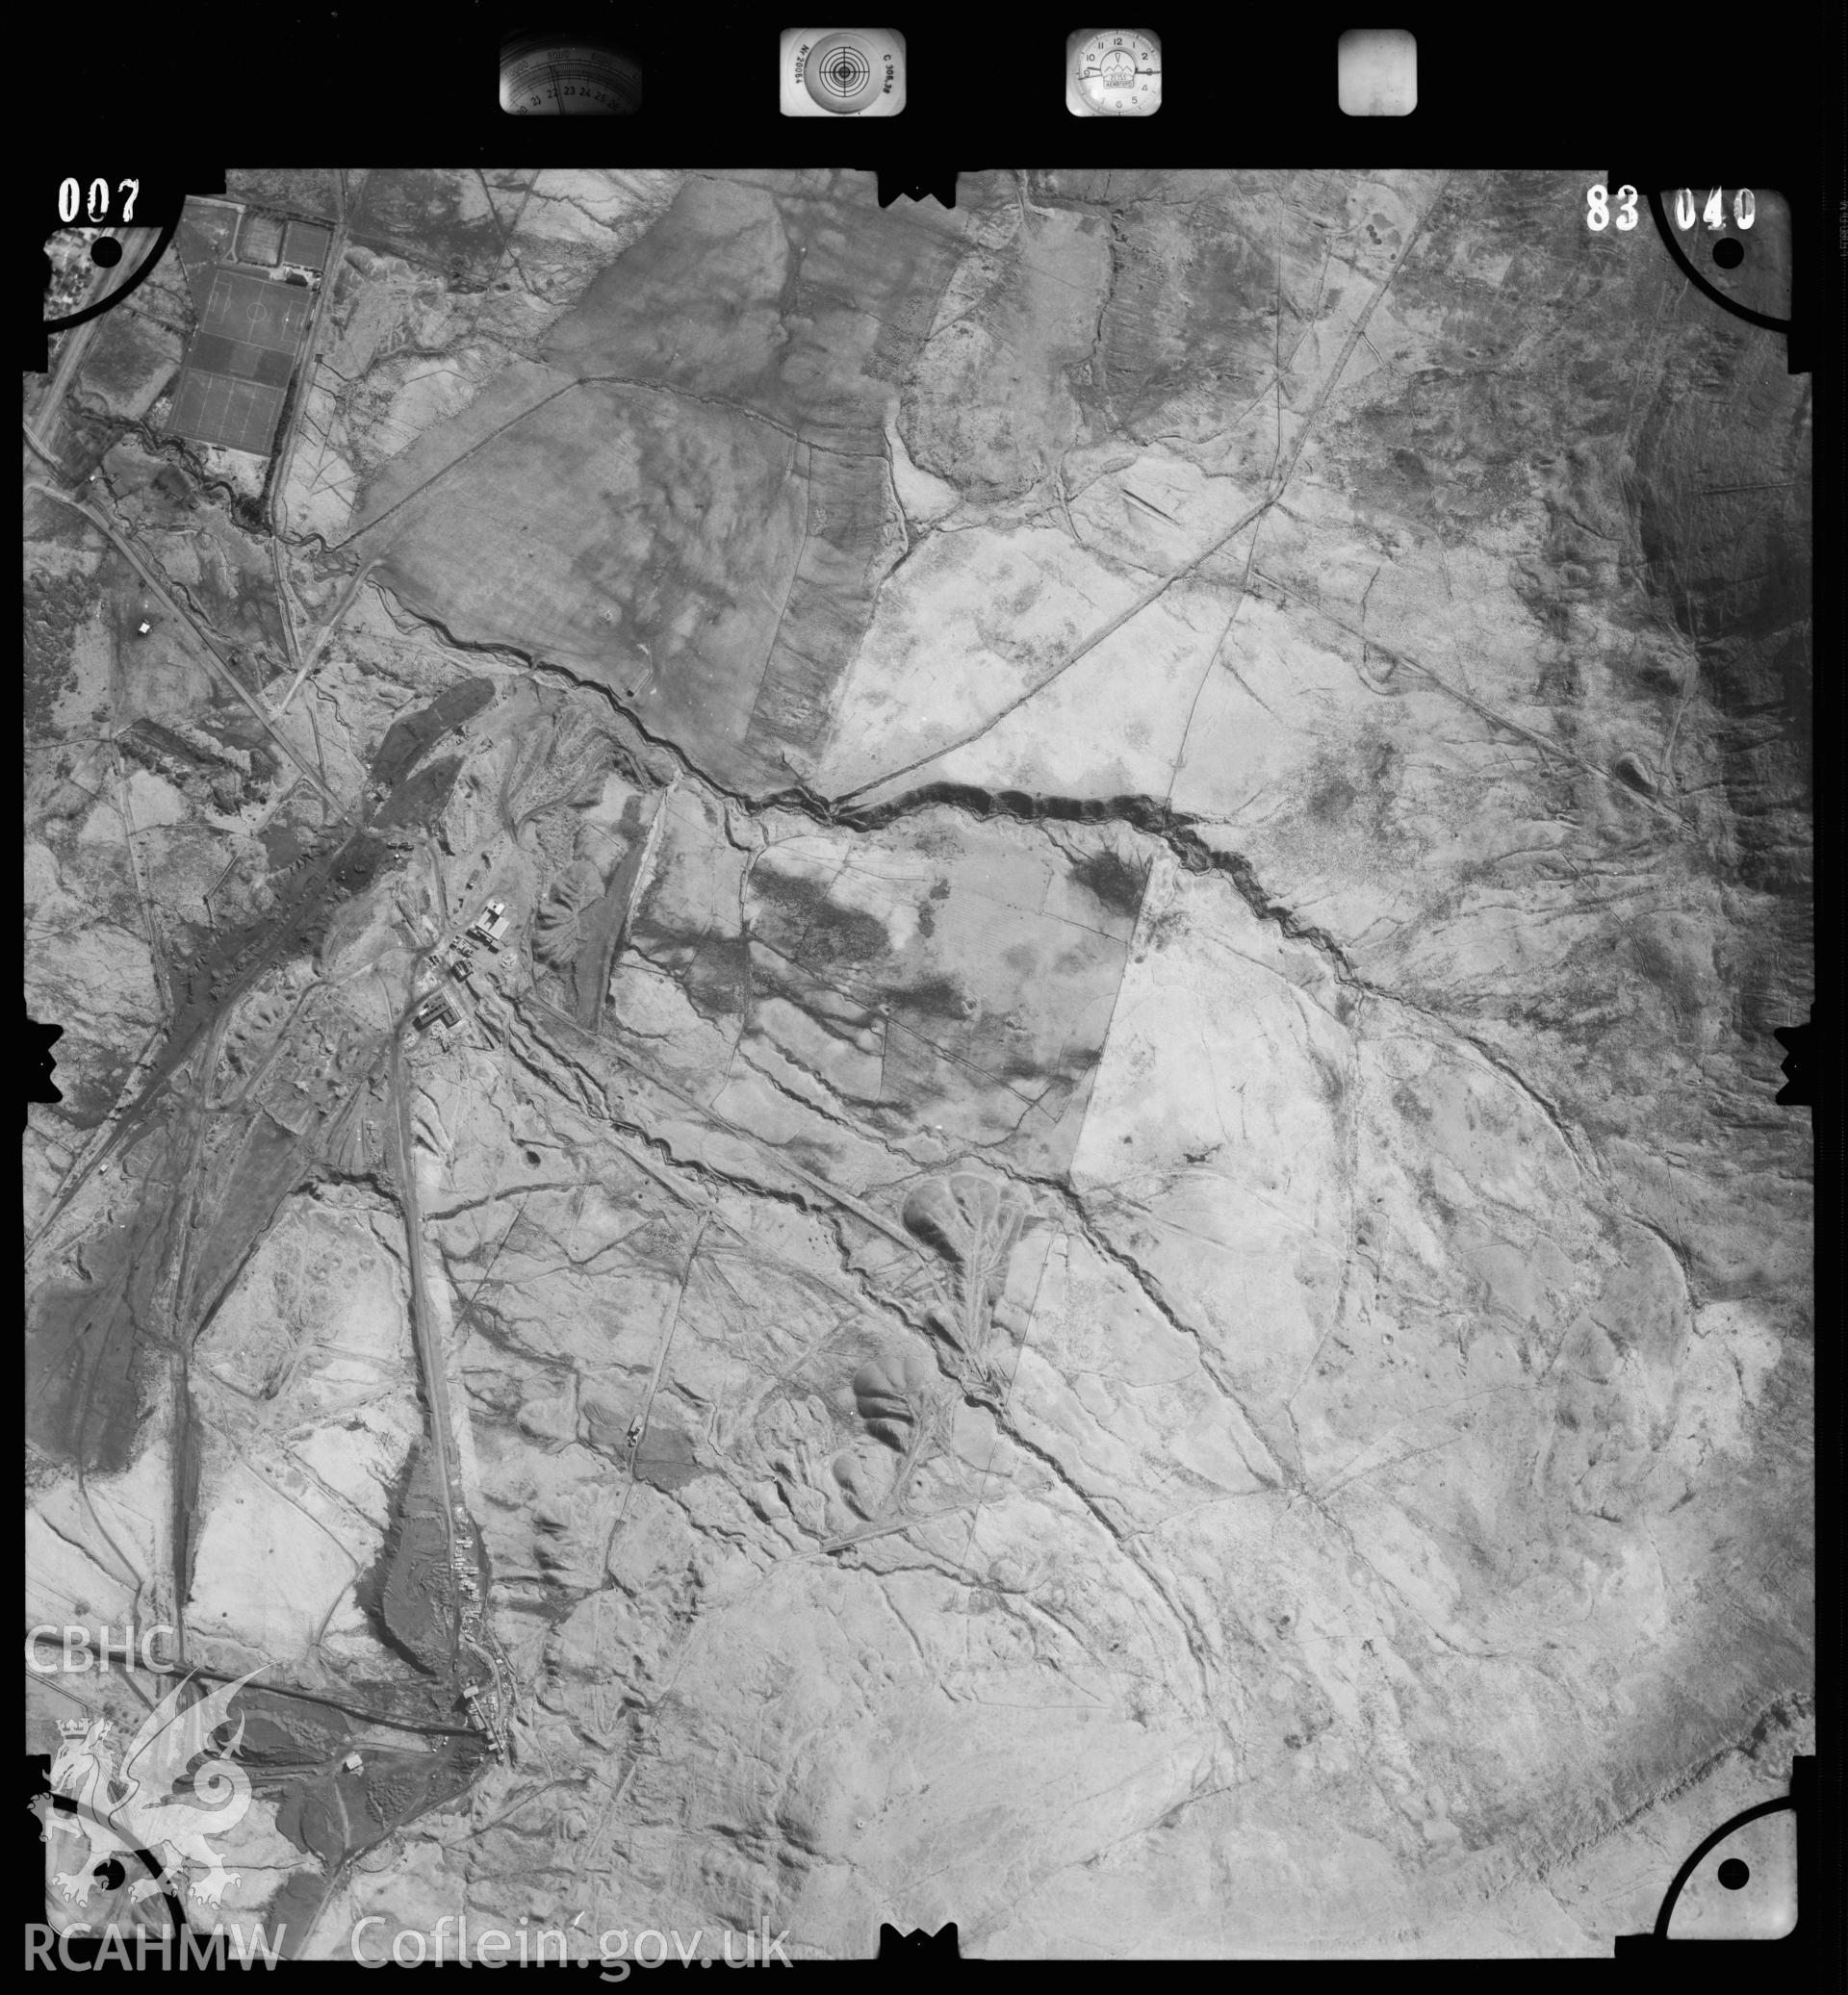 Digitized copy of an aerial photograph showing the area around Tower Drift Mine, Hirwaun, taken by Ordnance Survey, 1983.